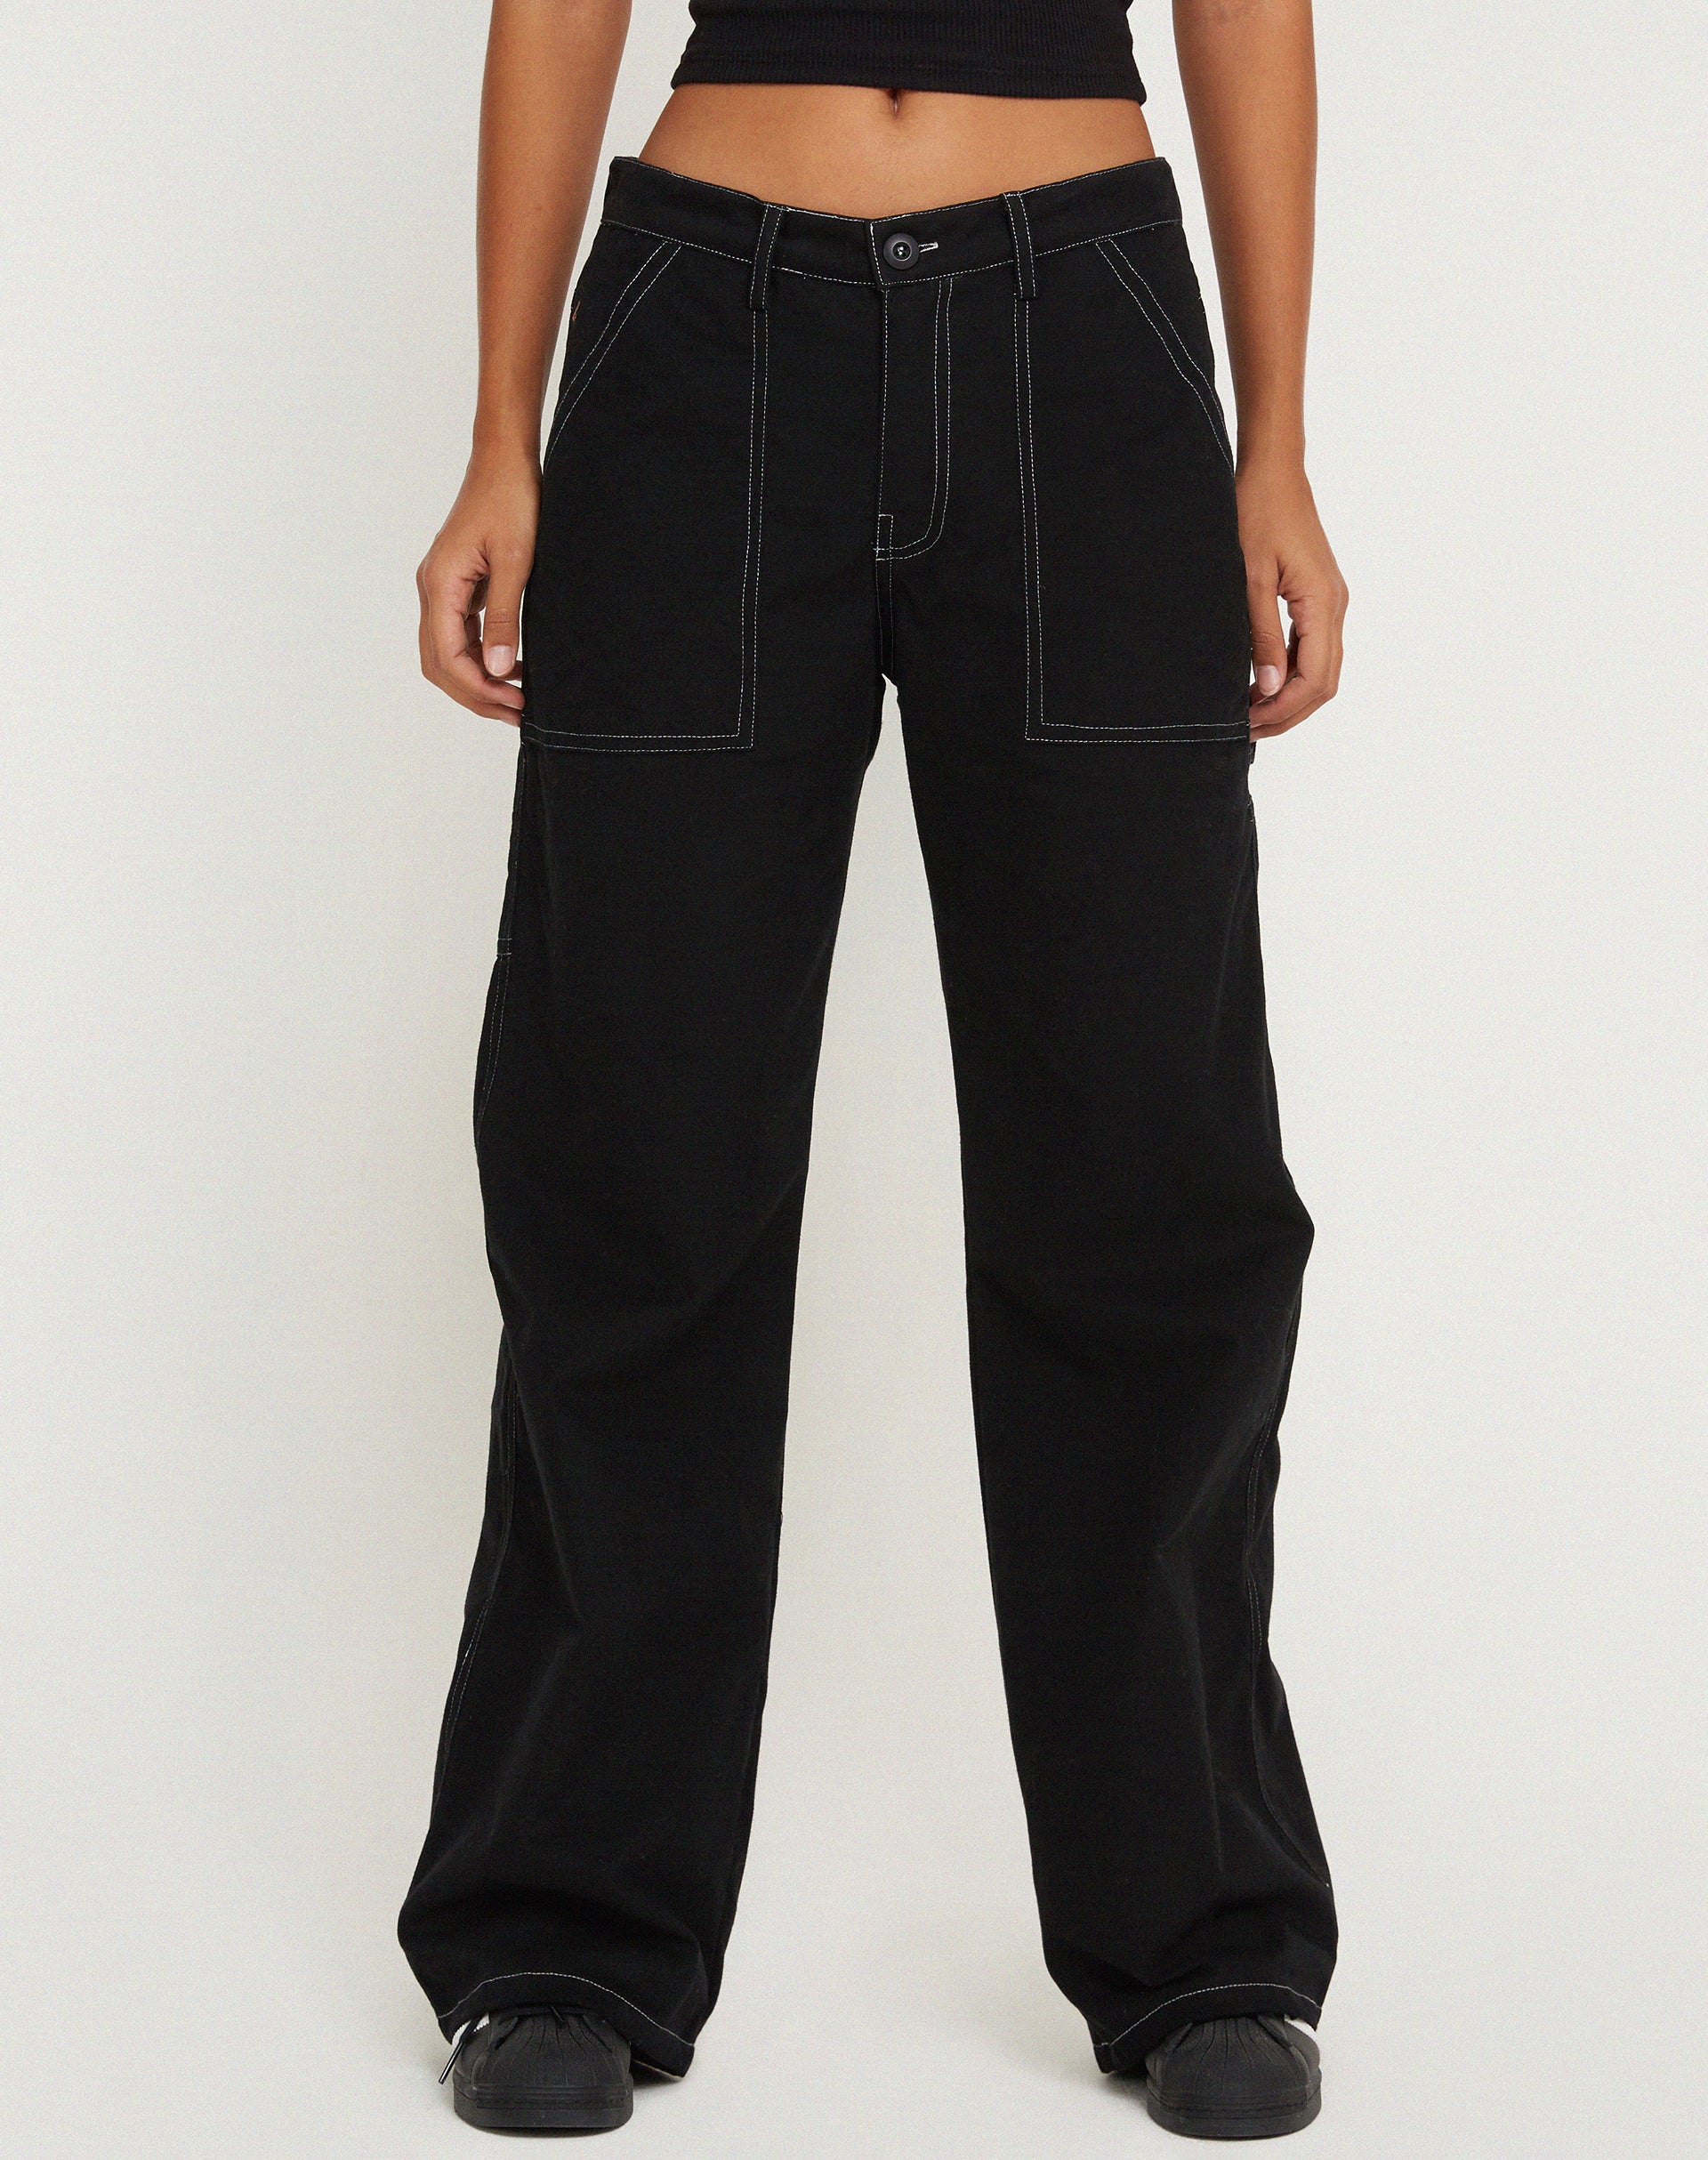 image of Kusnaedi Wide Leg Trouser in Black and White Top Stitch